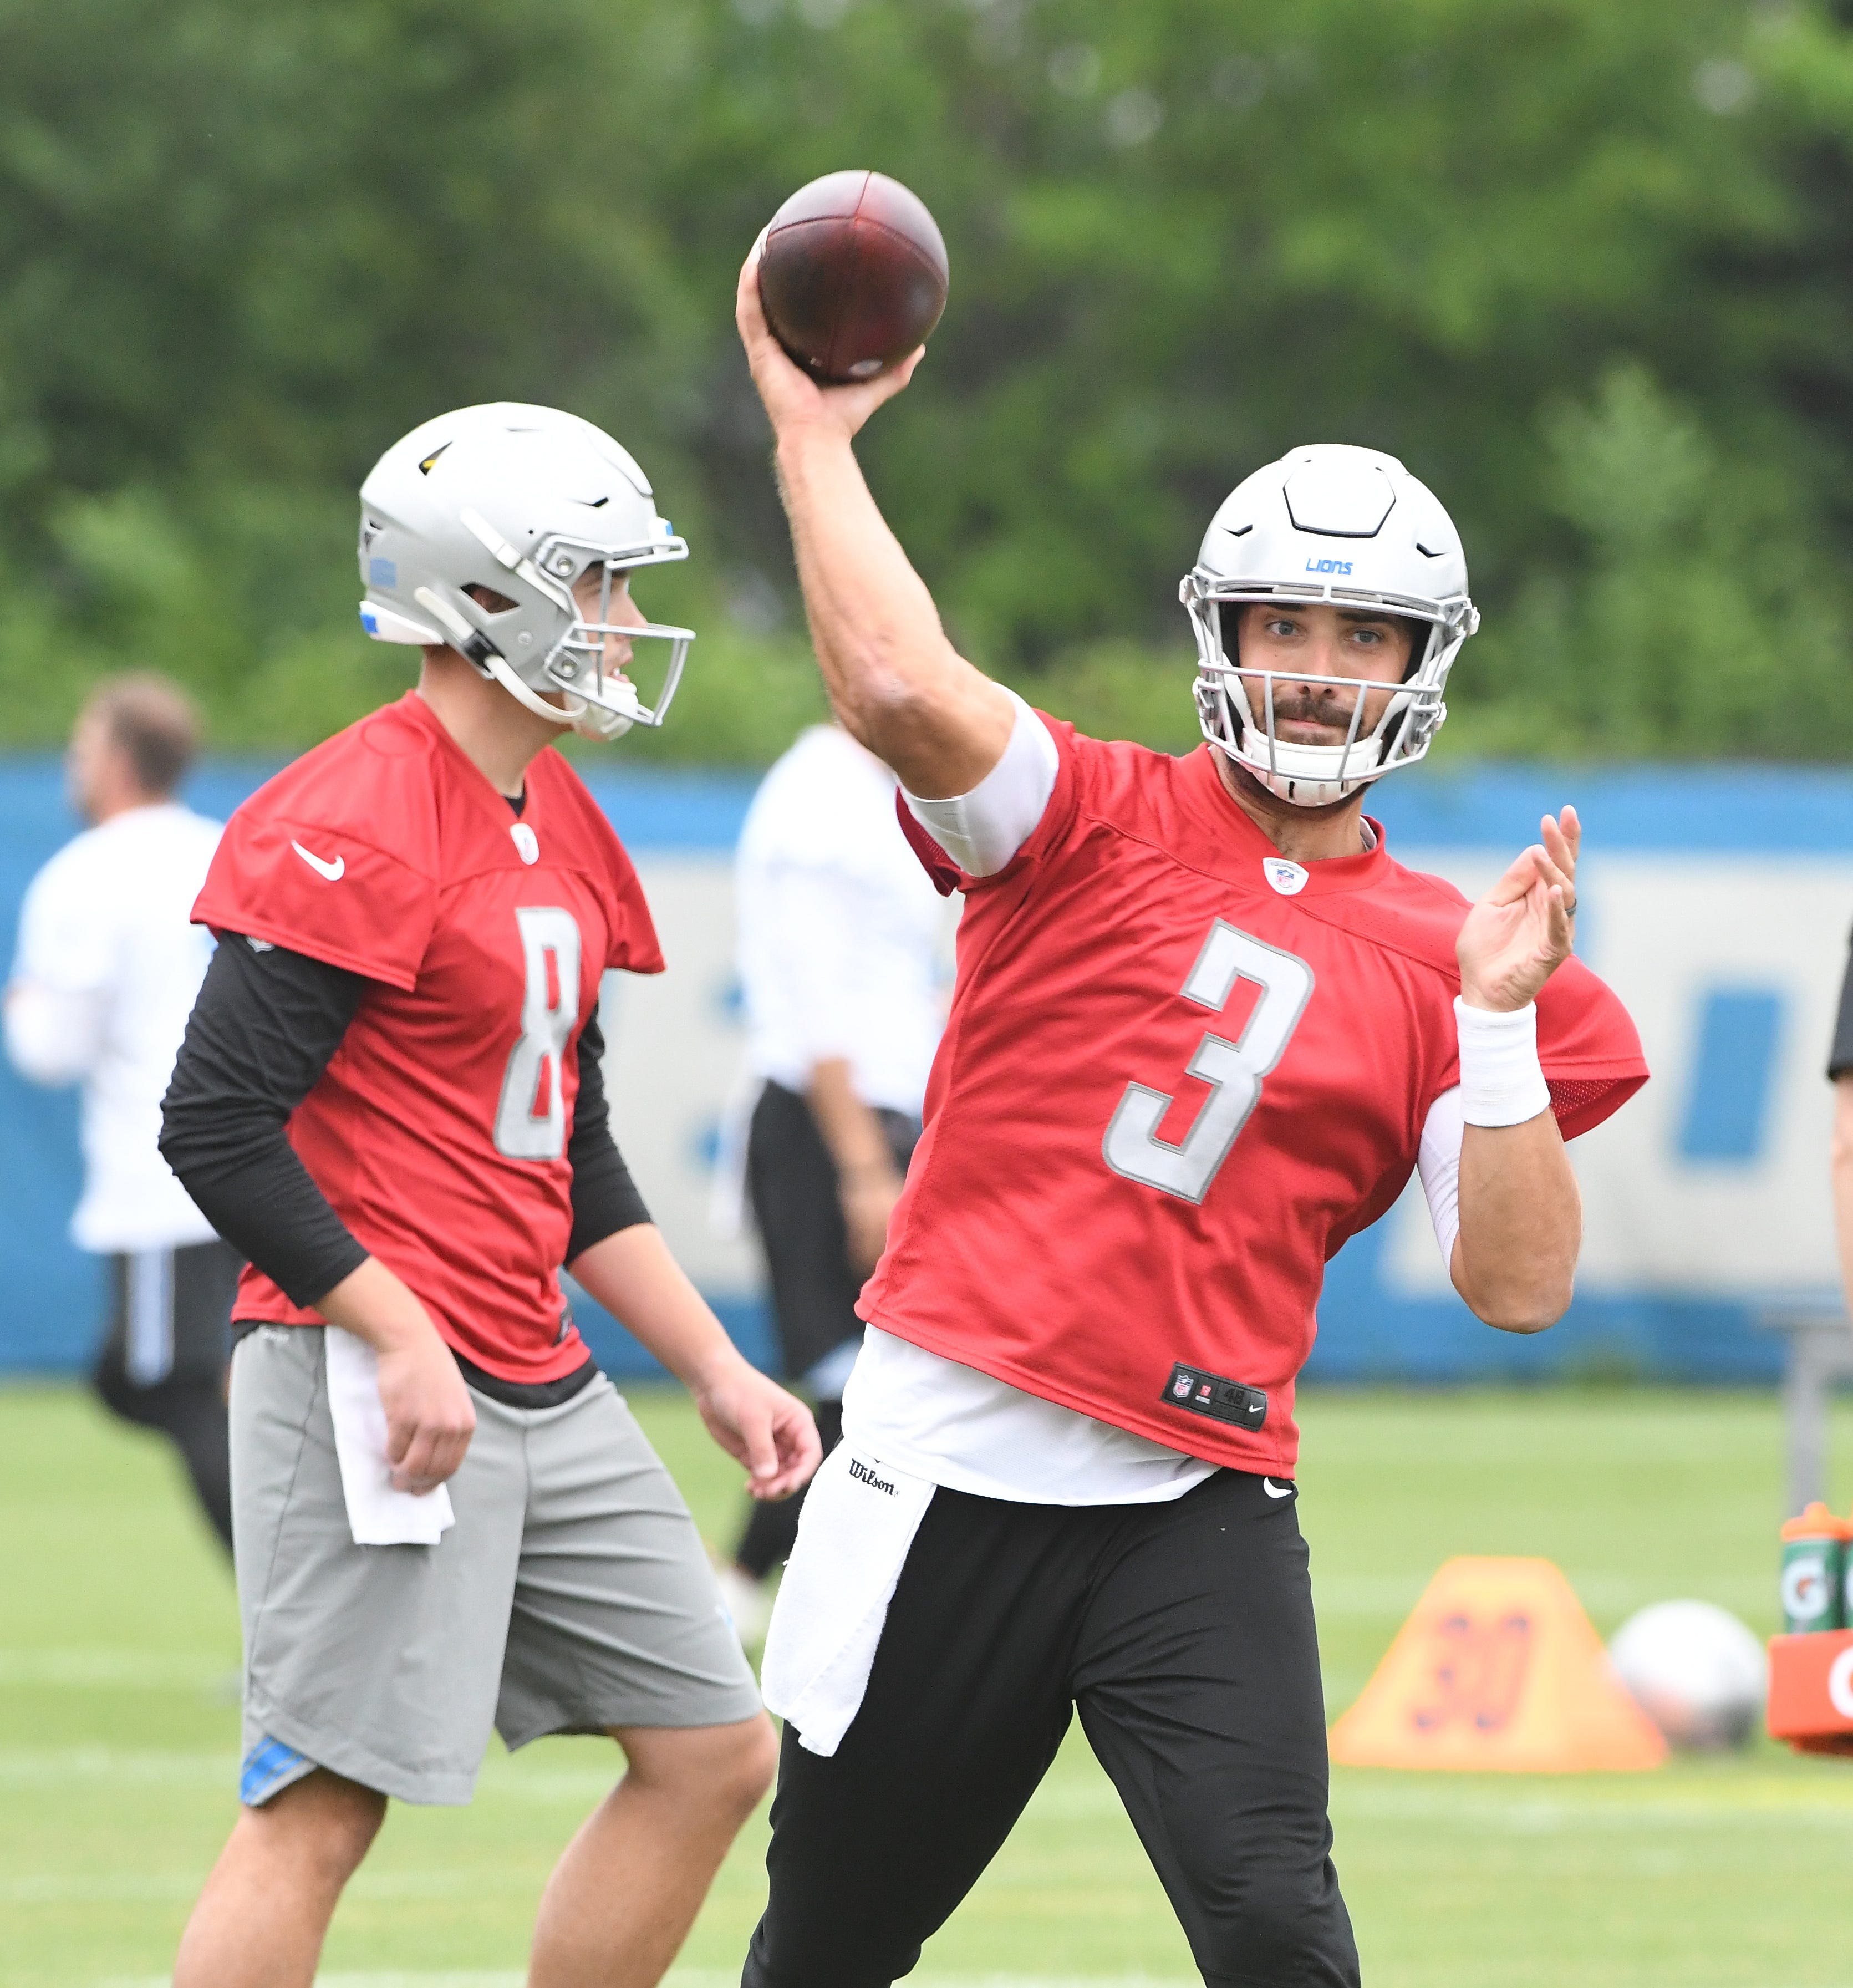 Lions quarterback Tom Savage with David Fales in background during drills.